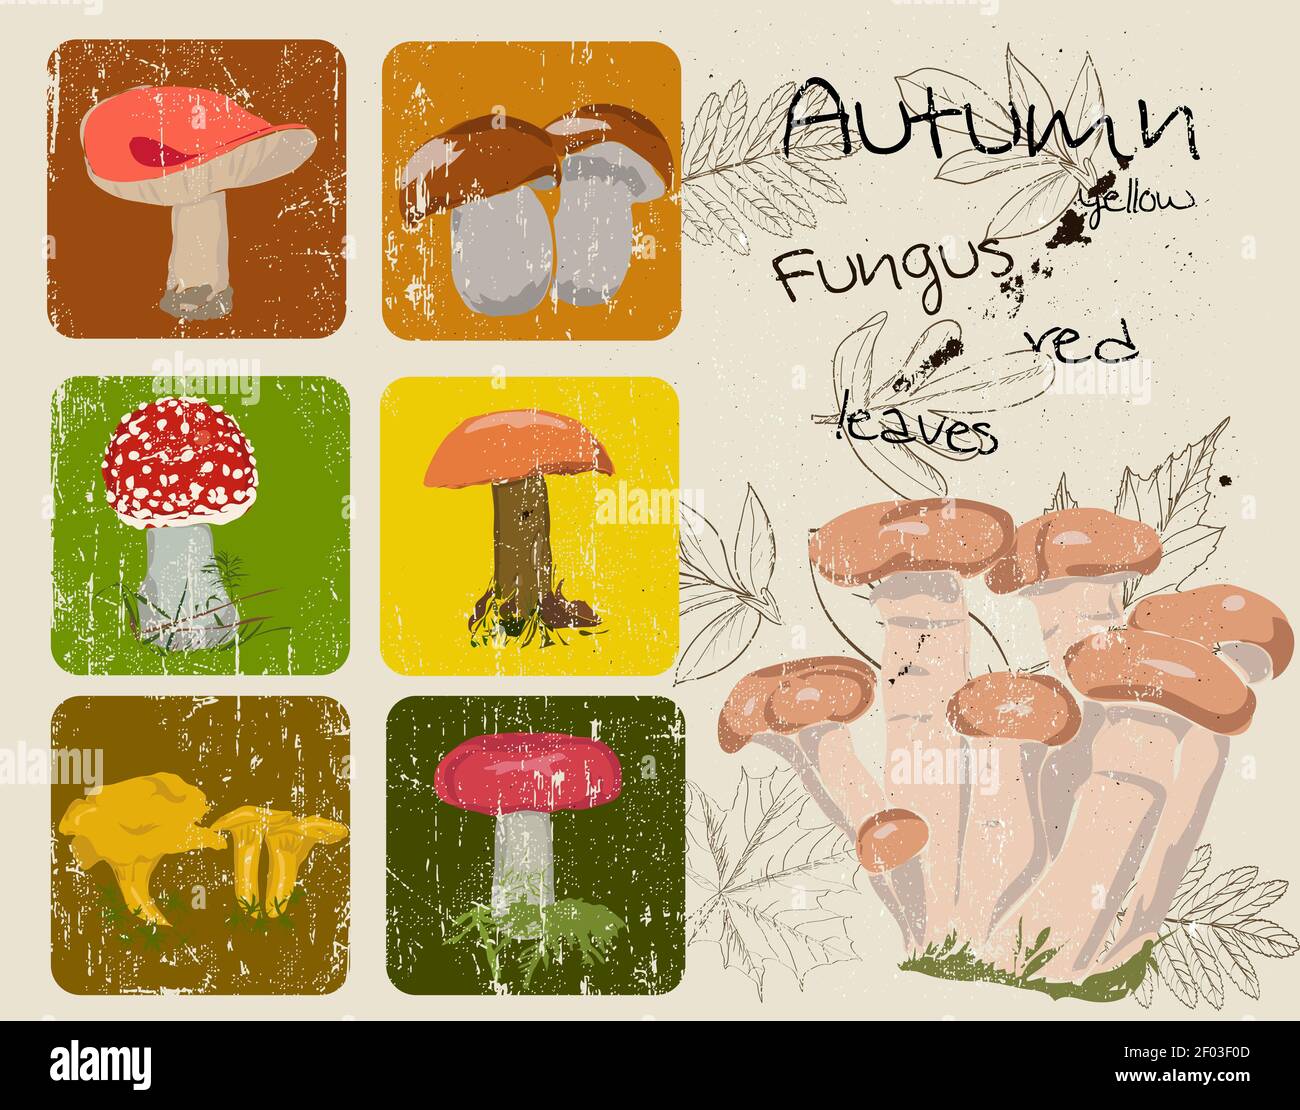 Vintage poster with autumn plants and fungus. Stock Photo